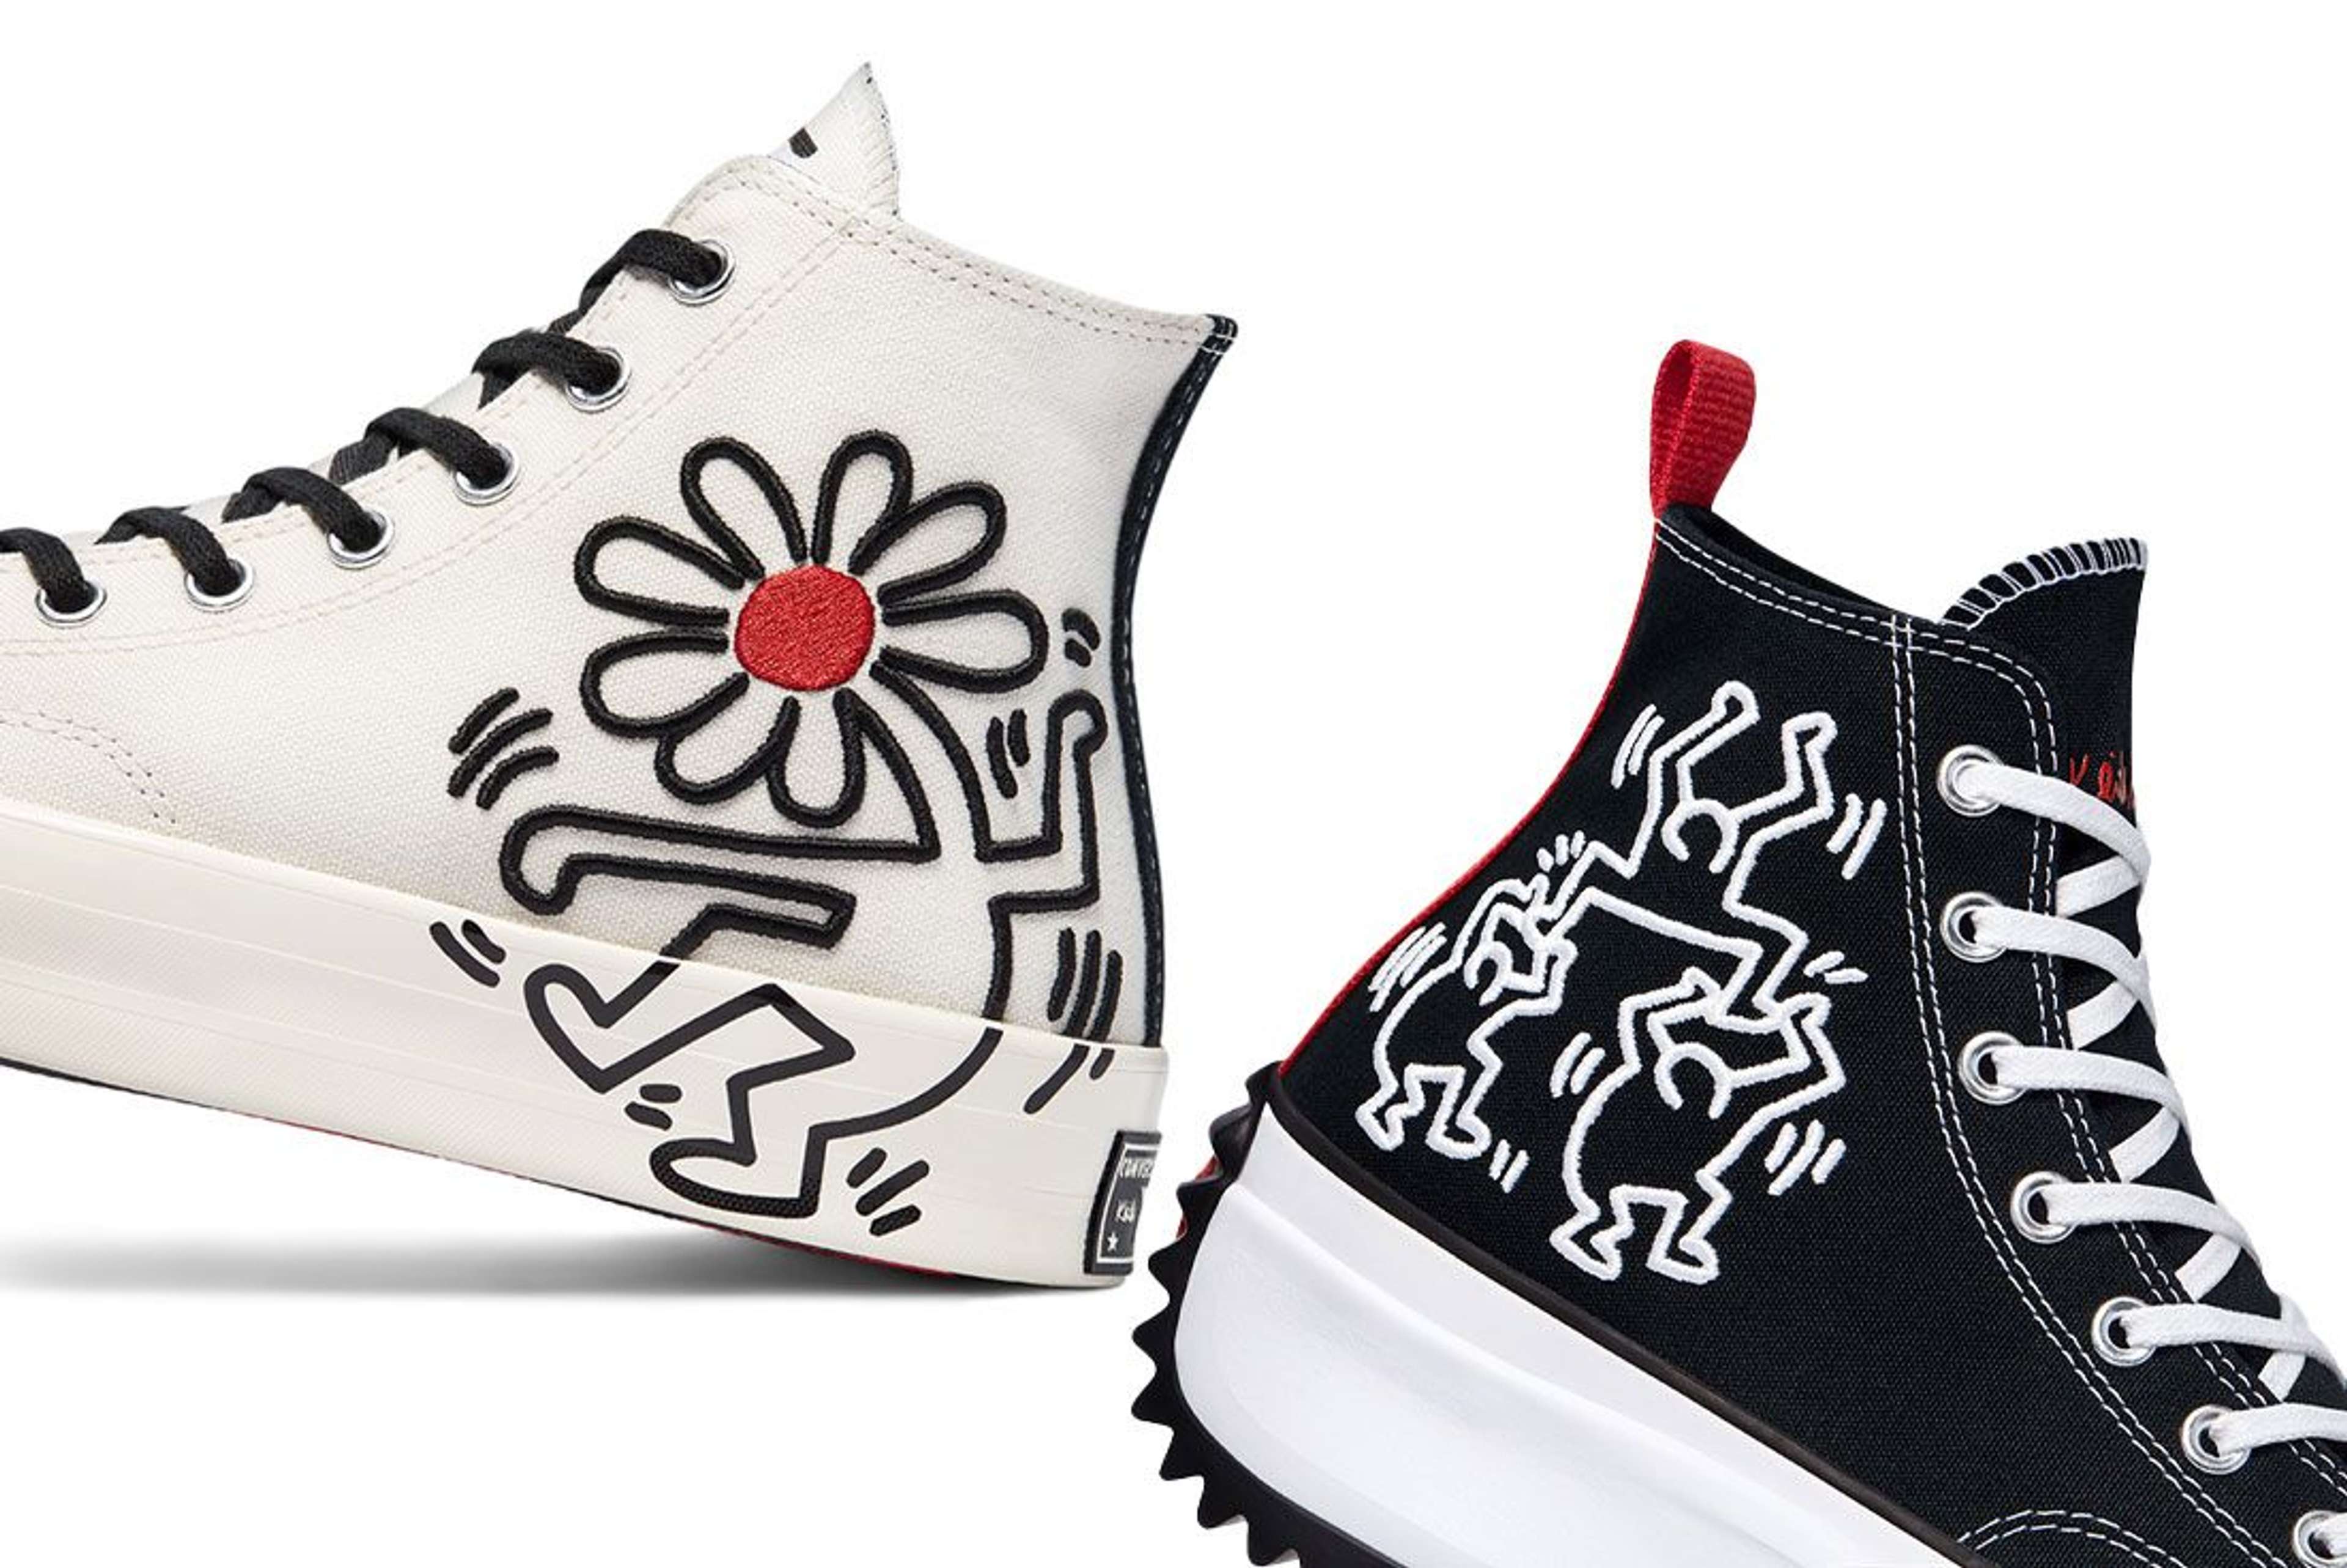 A collage of two sneakers from Converse’s collaboration with artist Keith Haring.